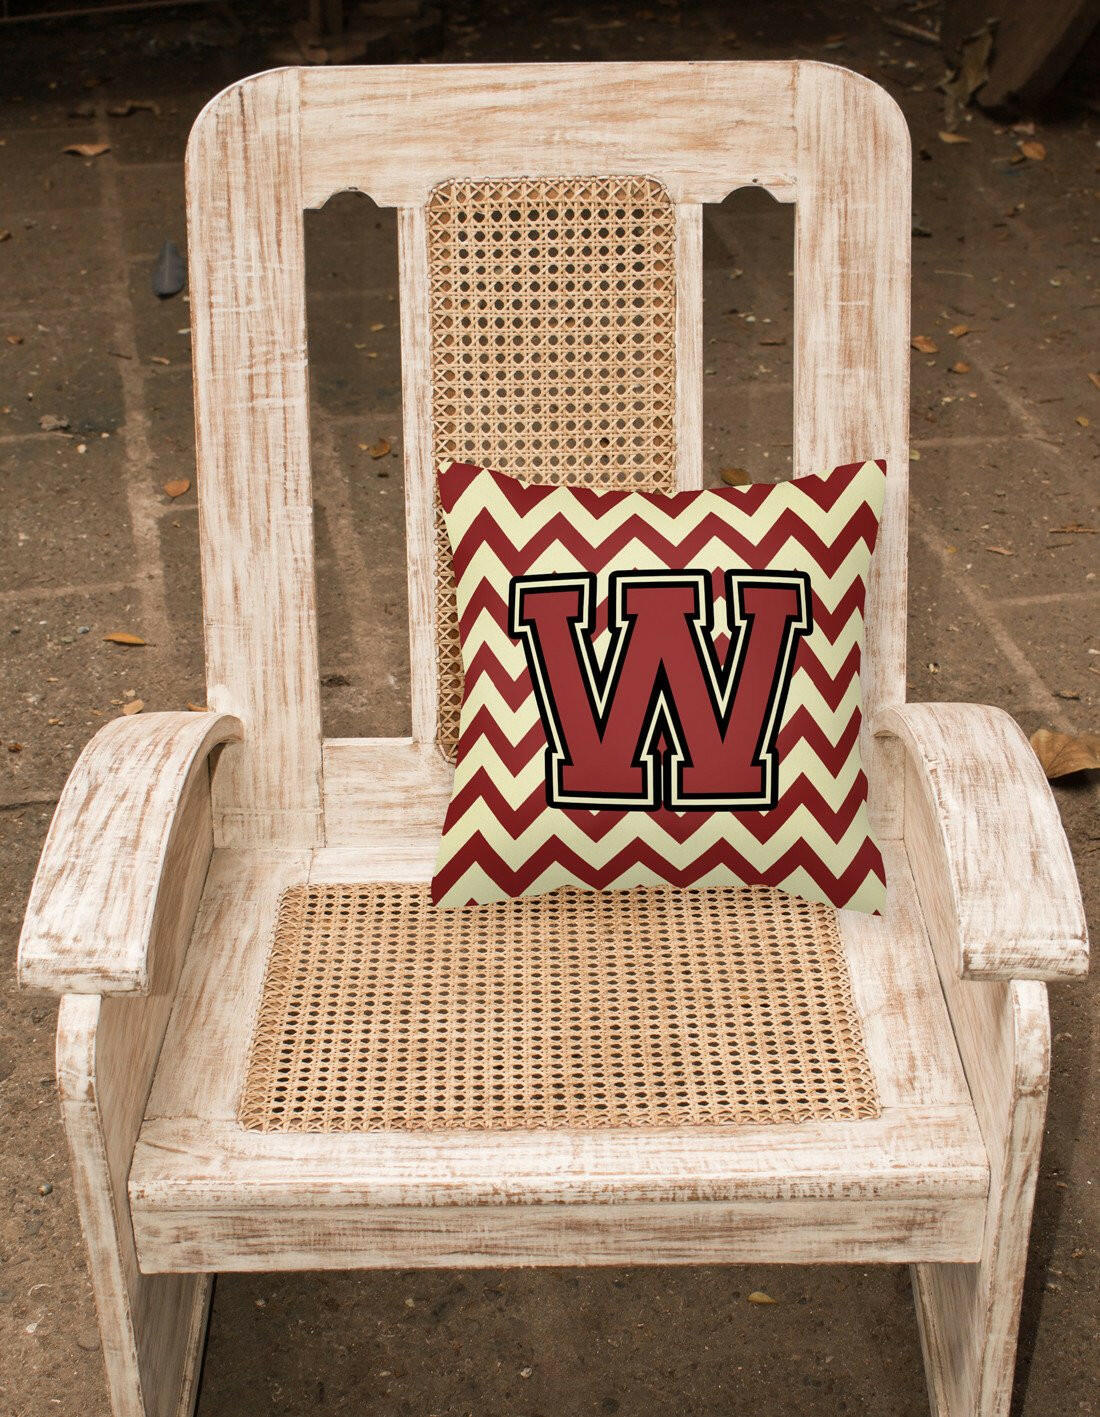 Letter W Chevron Maroon and Gold Fabric Decorative Pillow CJ1061-WPW1414 by Caroline's Treasures